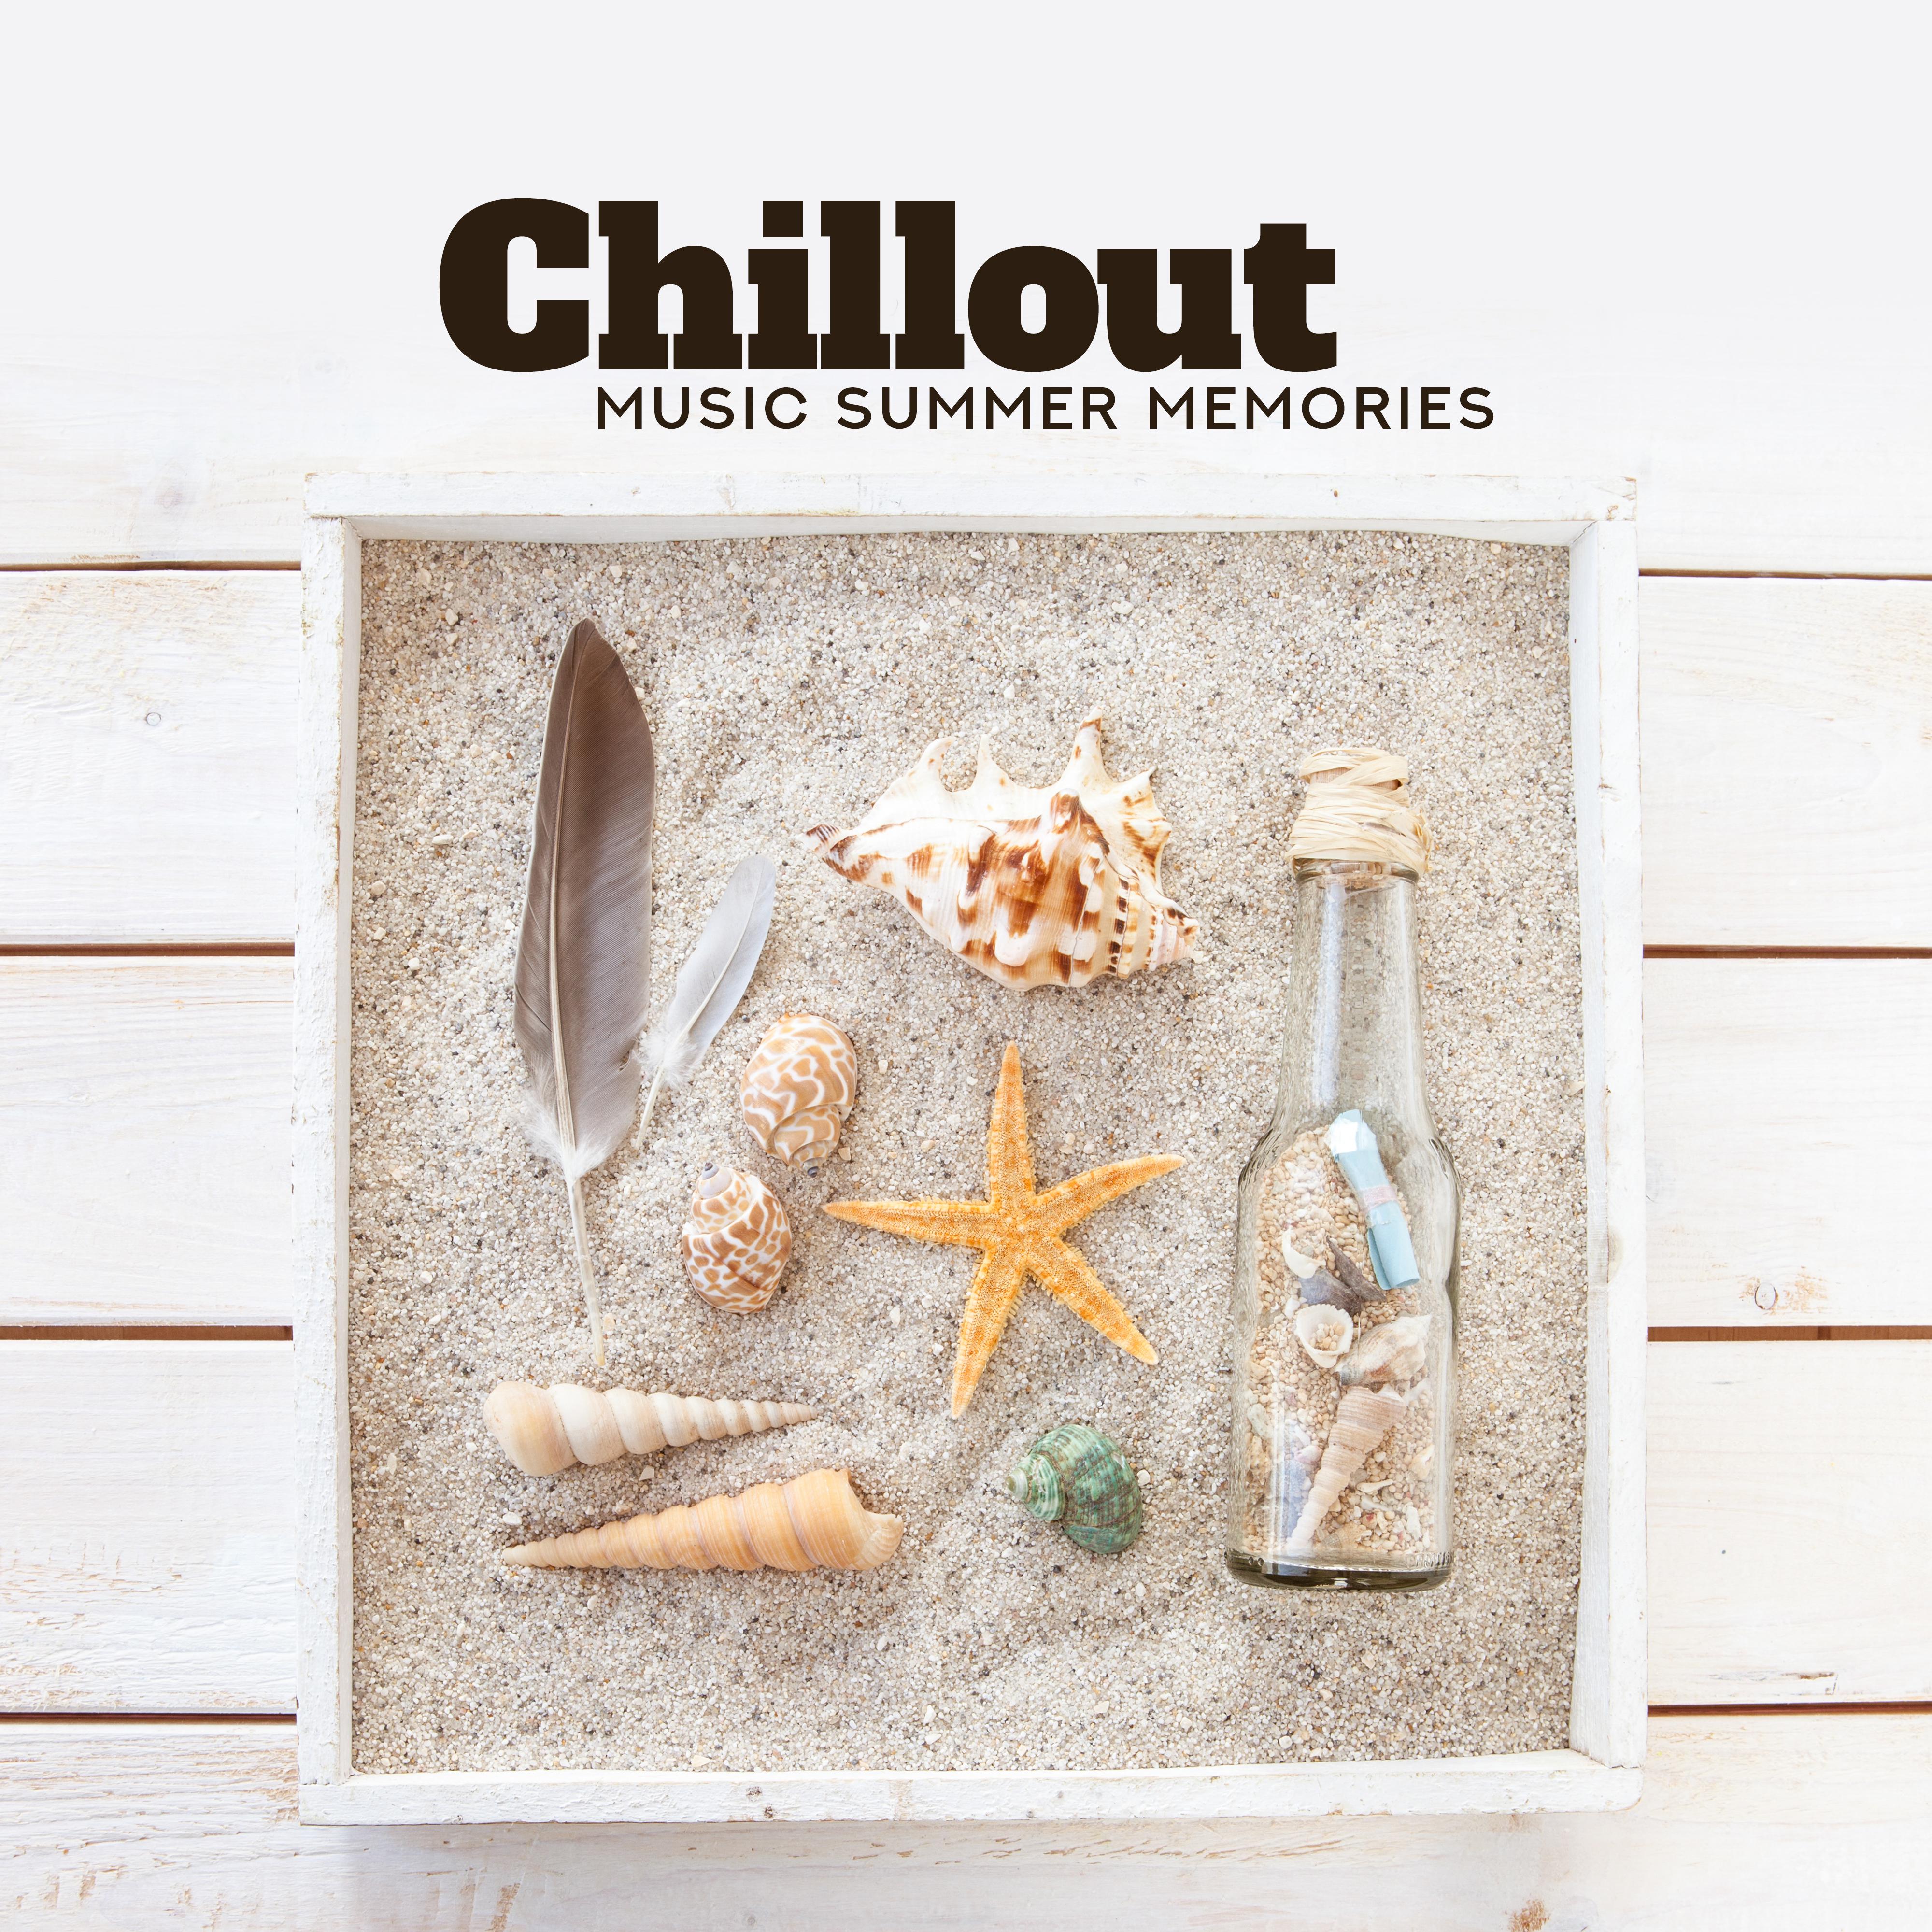 Chillout Music Summer Memories: Compilation of 15 Relaxing Electronic Beats for Total Chill